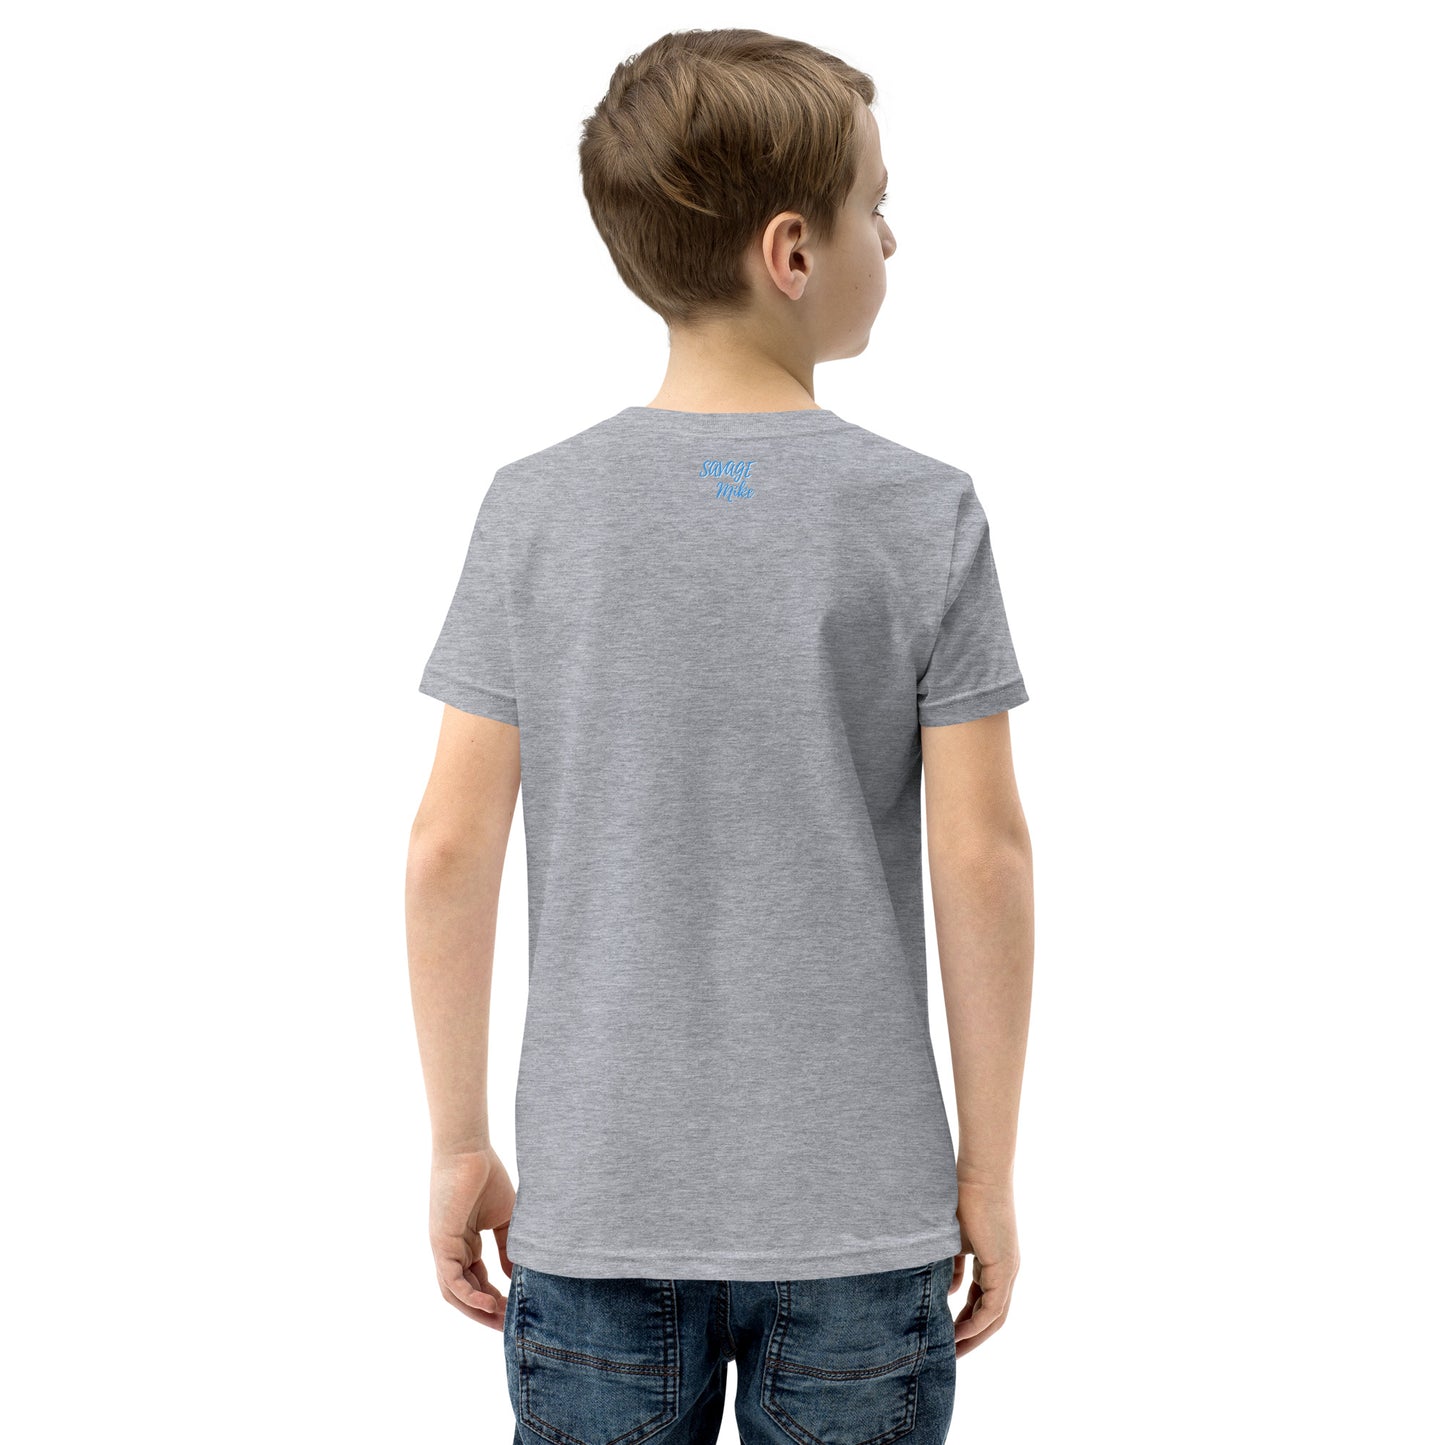 Later Youth Short Sleeve T-Shirt